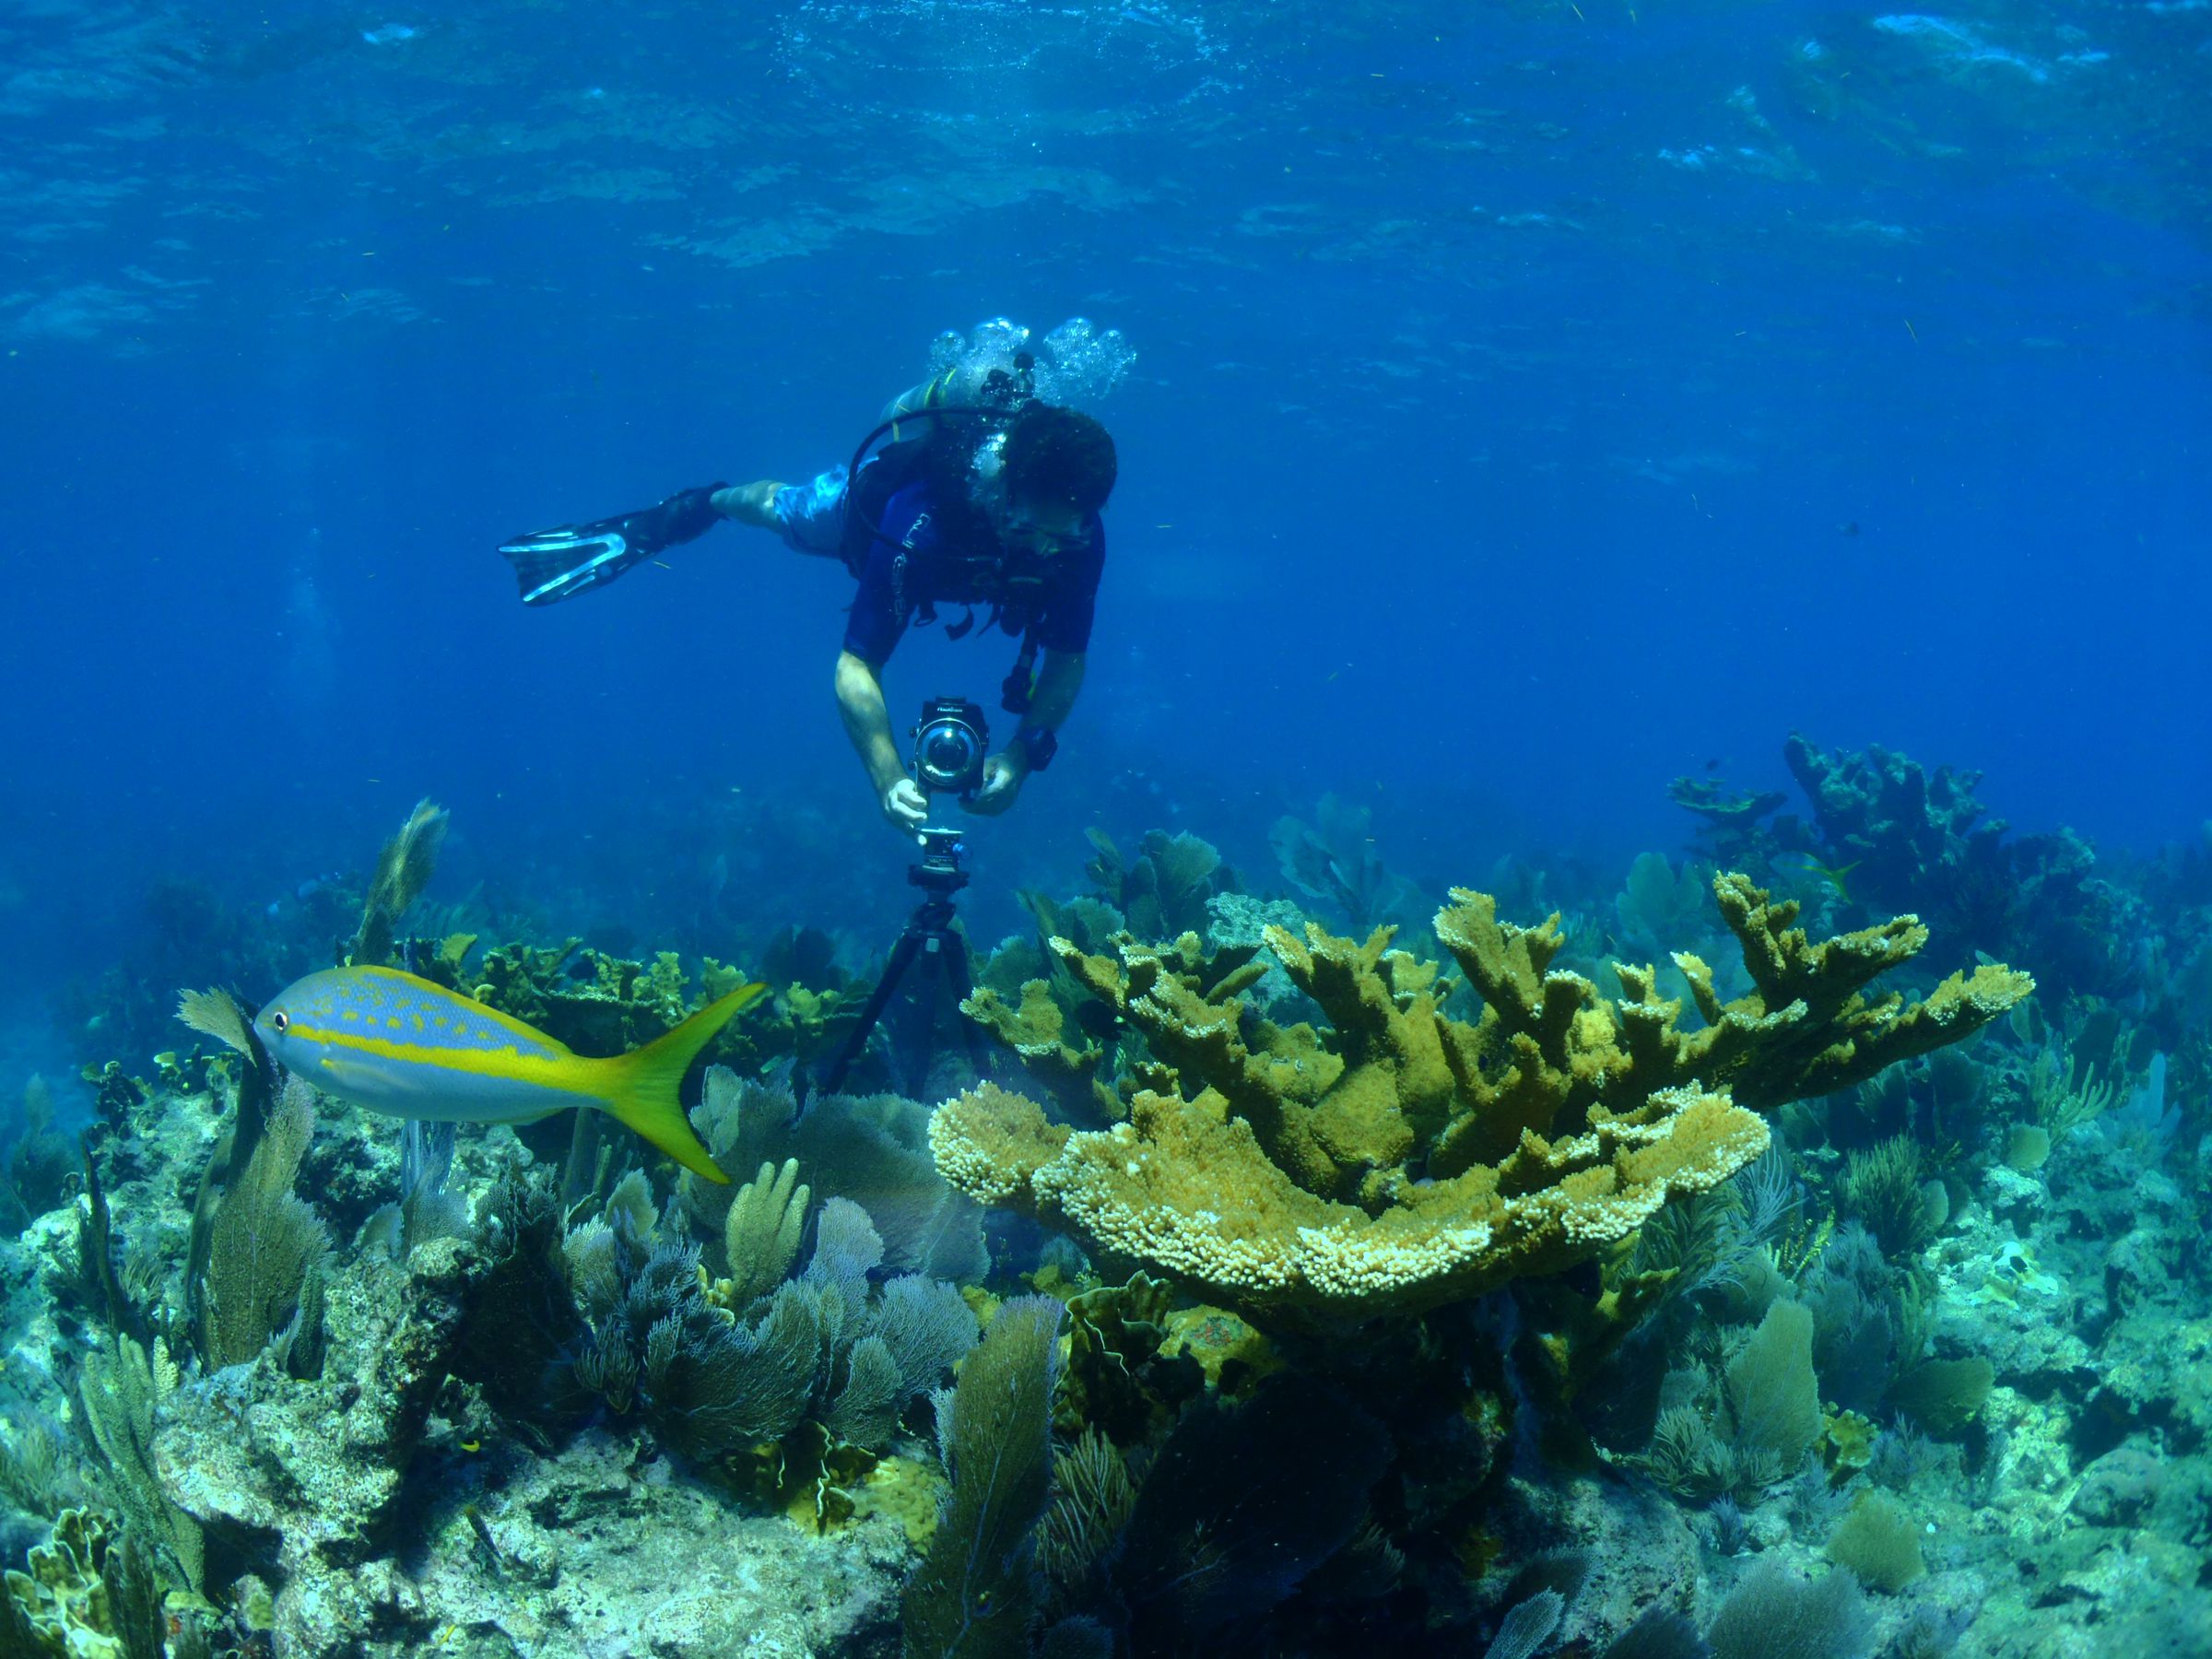 A NOAA diver takes photos that will ultimately be stitched into a 360-degree image of Florida Keys National Marine Sanctuary.